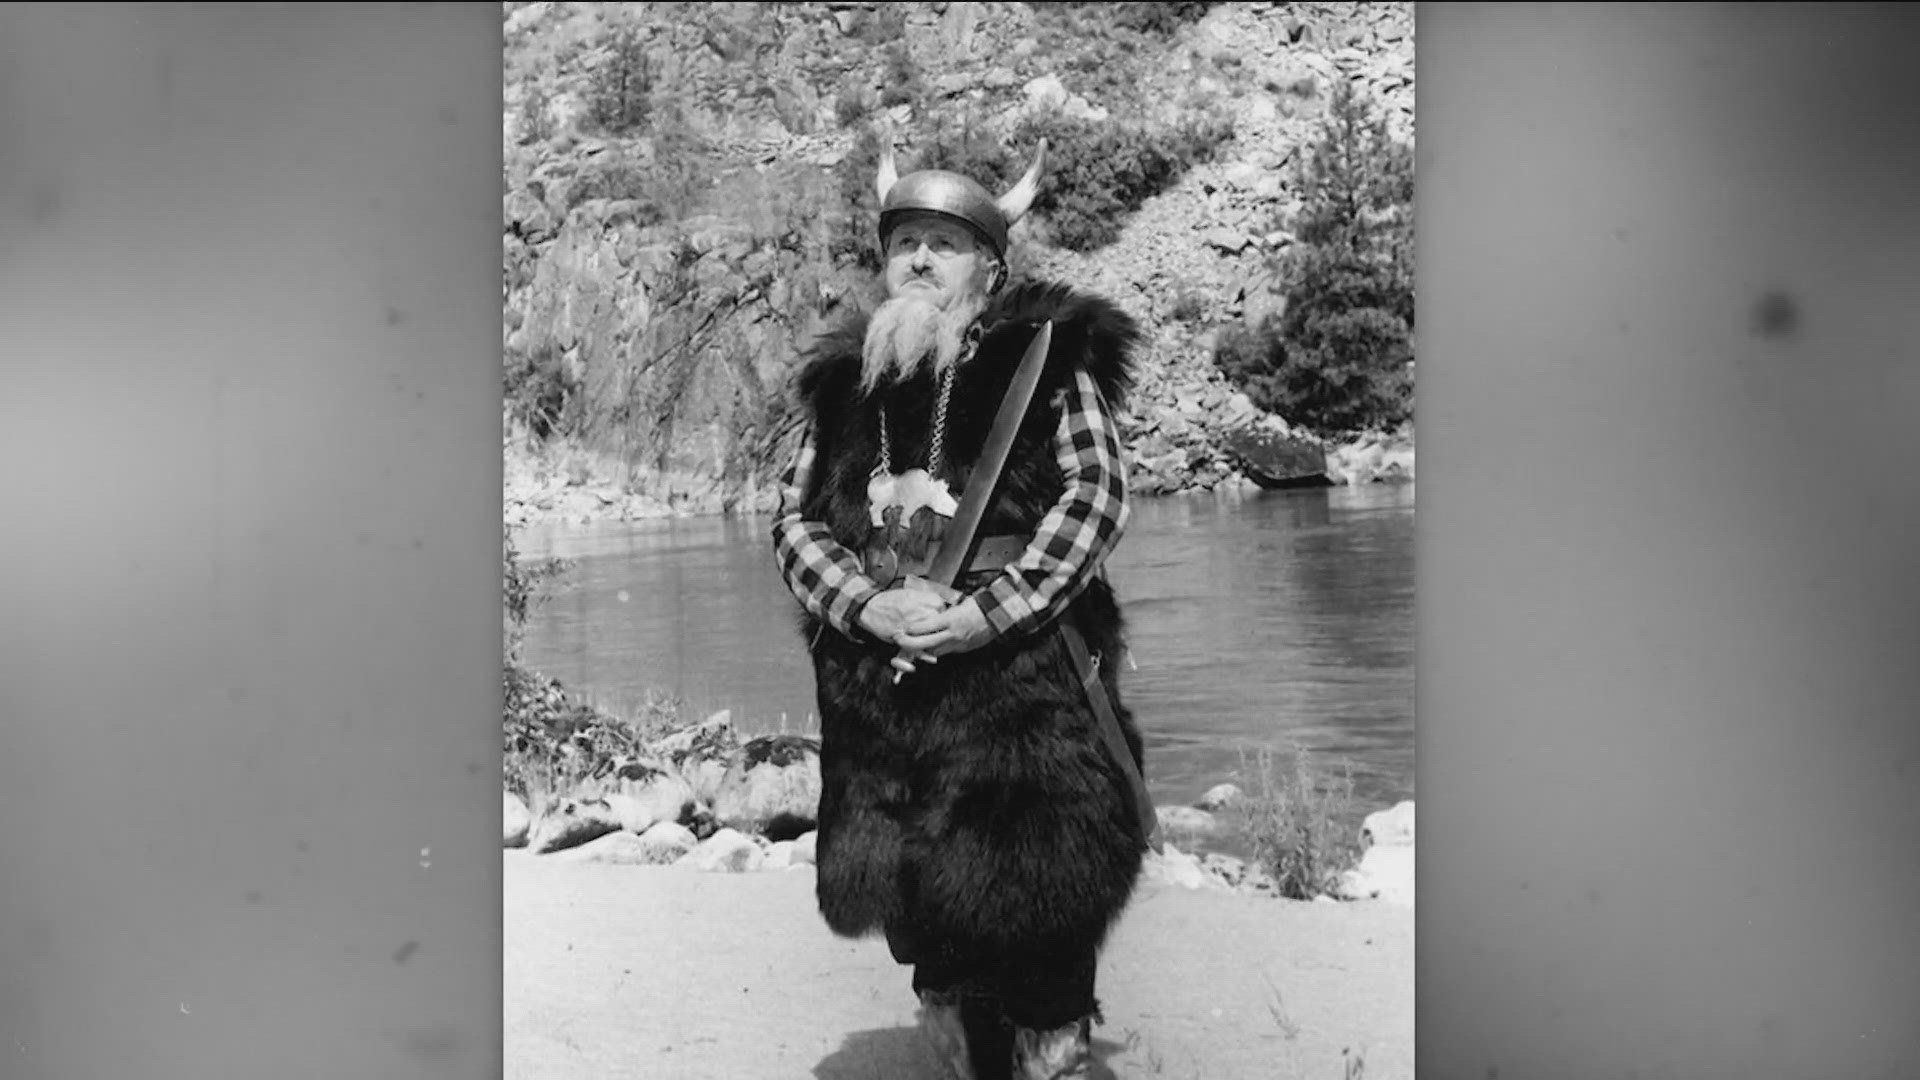 Buckskin Bill was known as the last true "mountain man." He passed away 44 years ago, and many 208 viewers had a few things to say about the fascinating man.